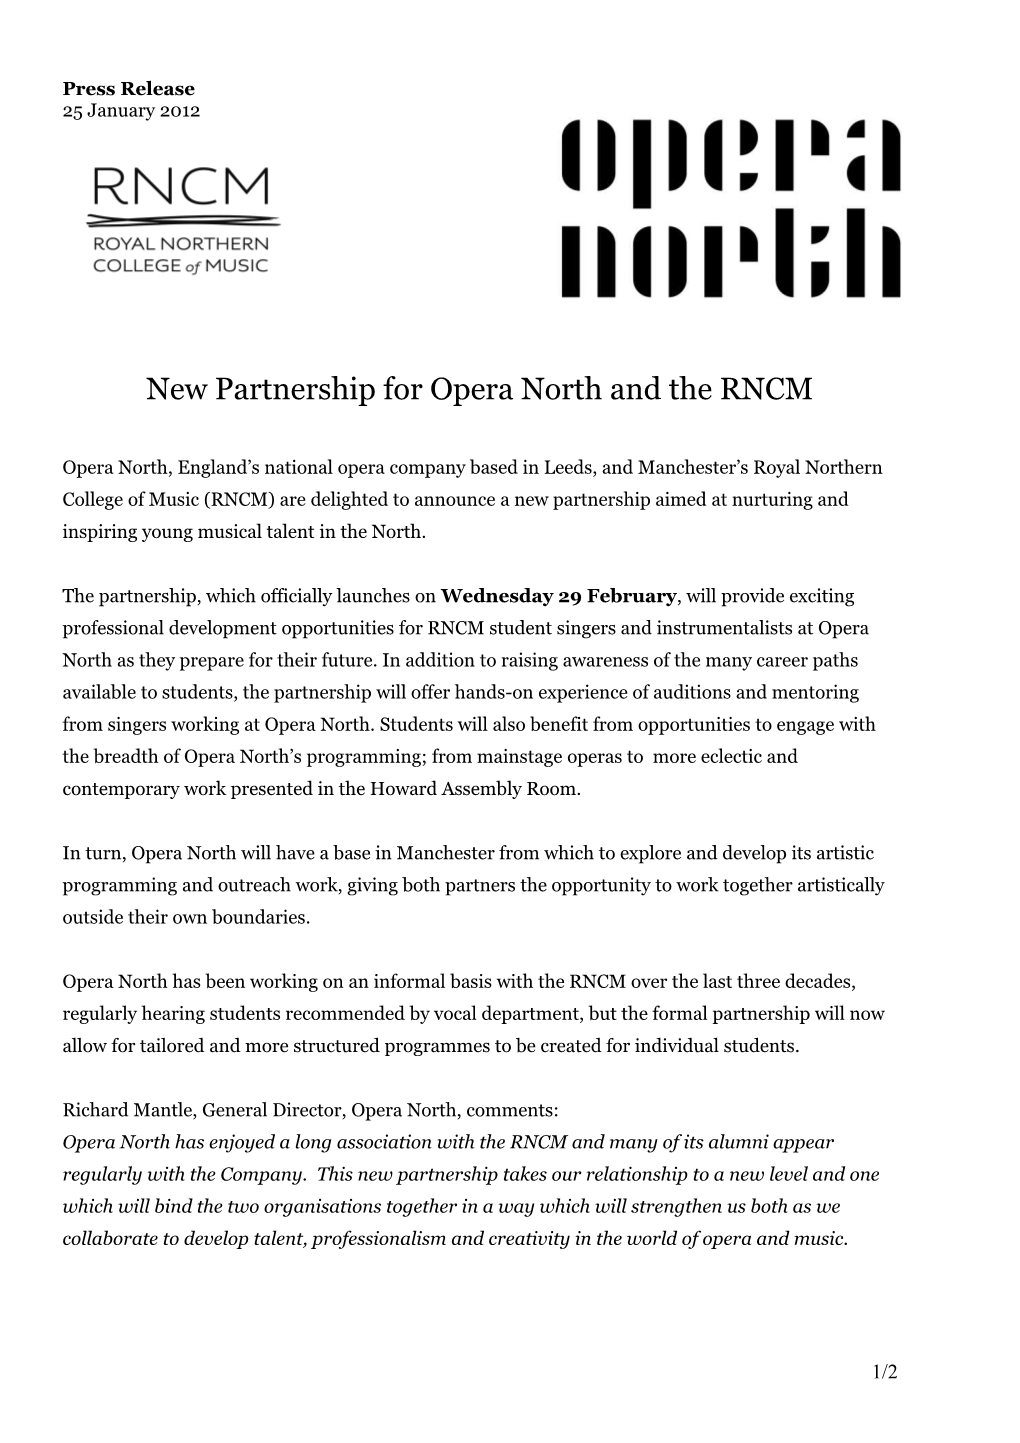 New Partnership for Opera North and the RNCM